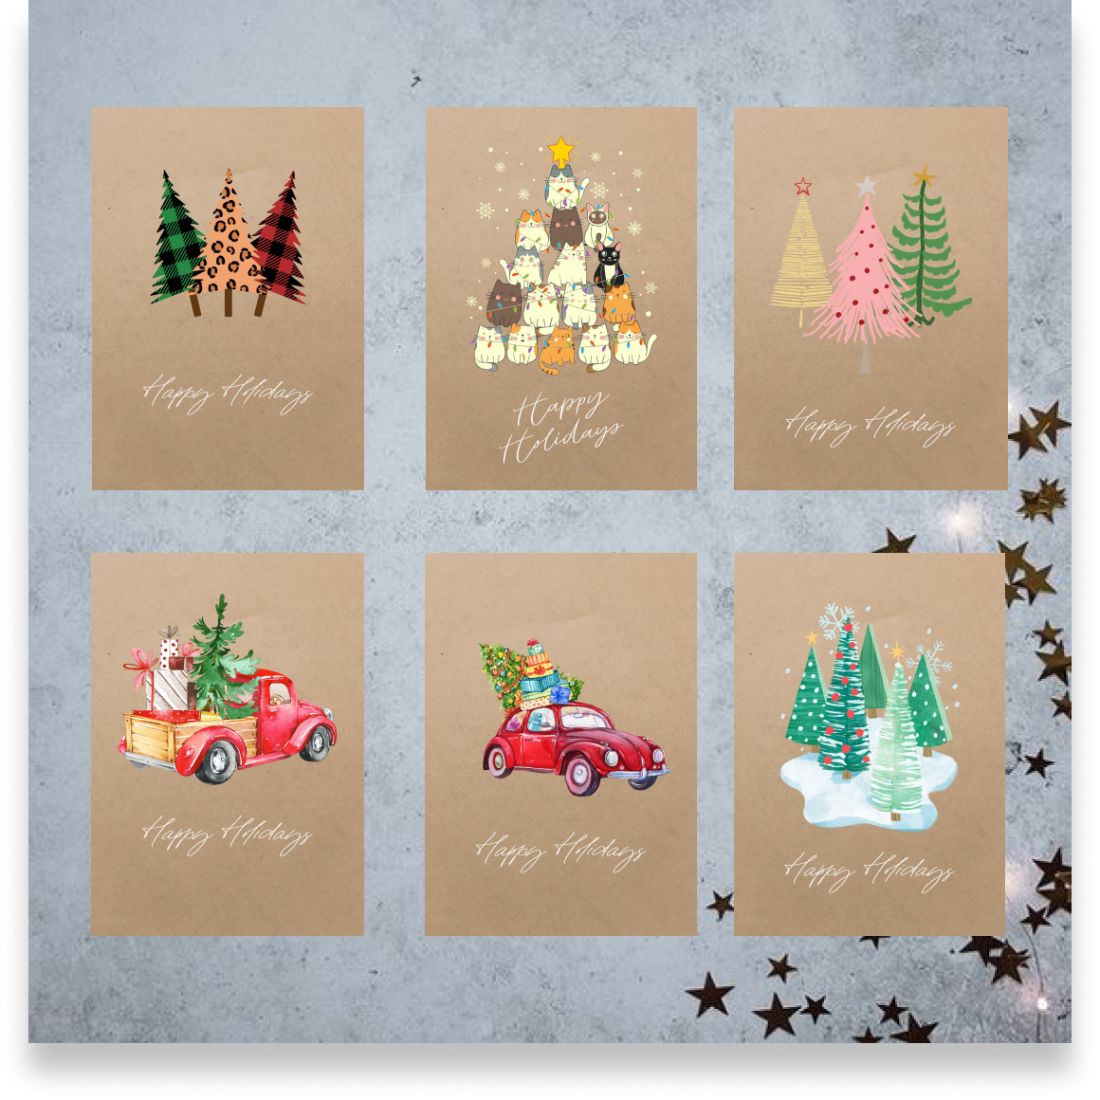 Cute Christmas Postcards Happy Holidays Design cover image.